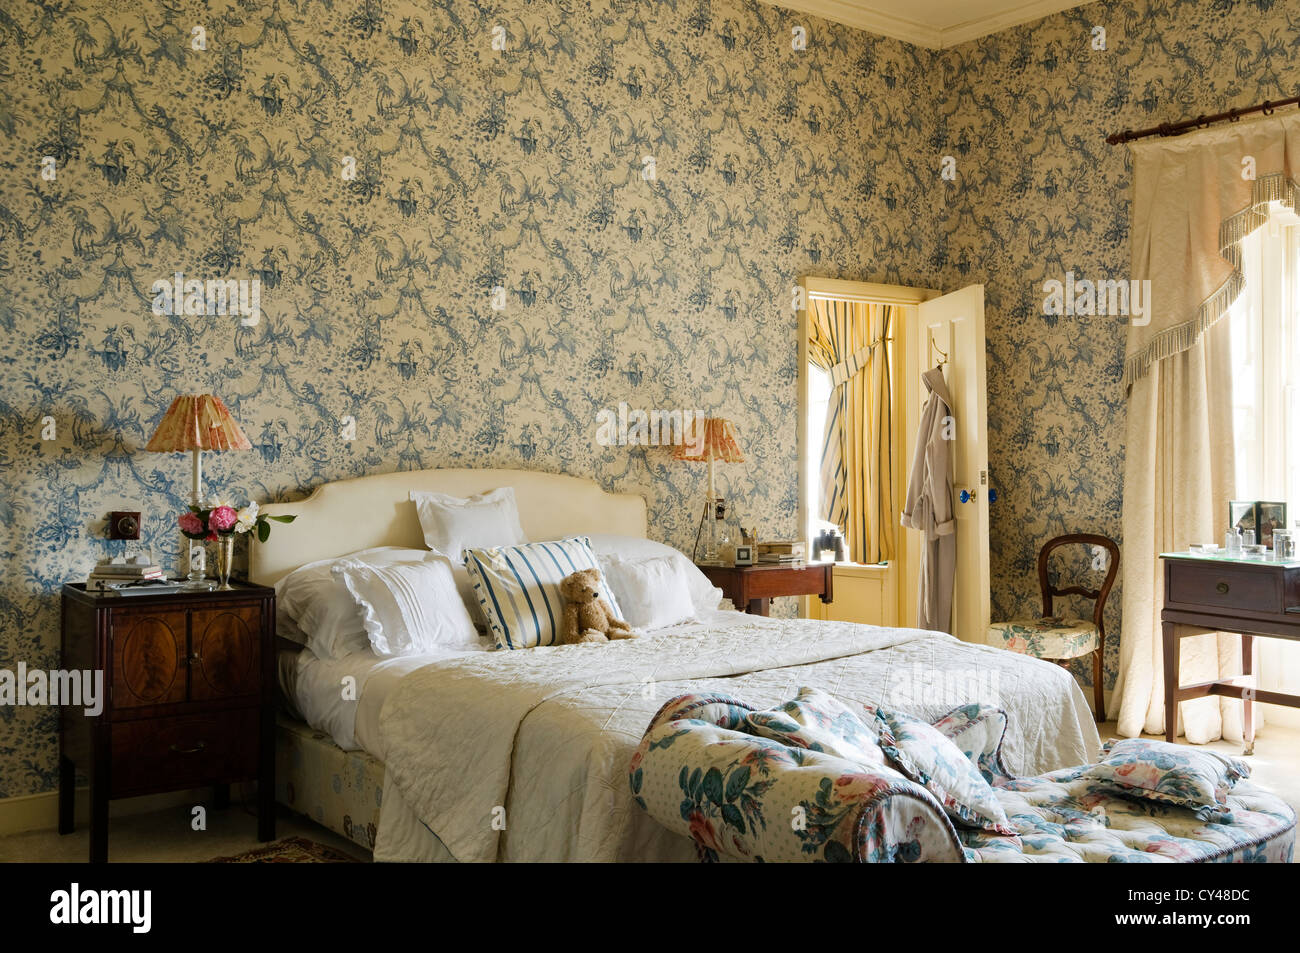 Toile de jouy wallpaper in bedroom with floral patterned chaise lounge at the foot of the bed Stock Photo